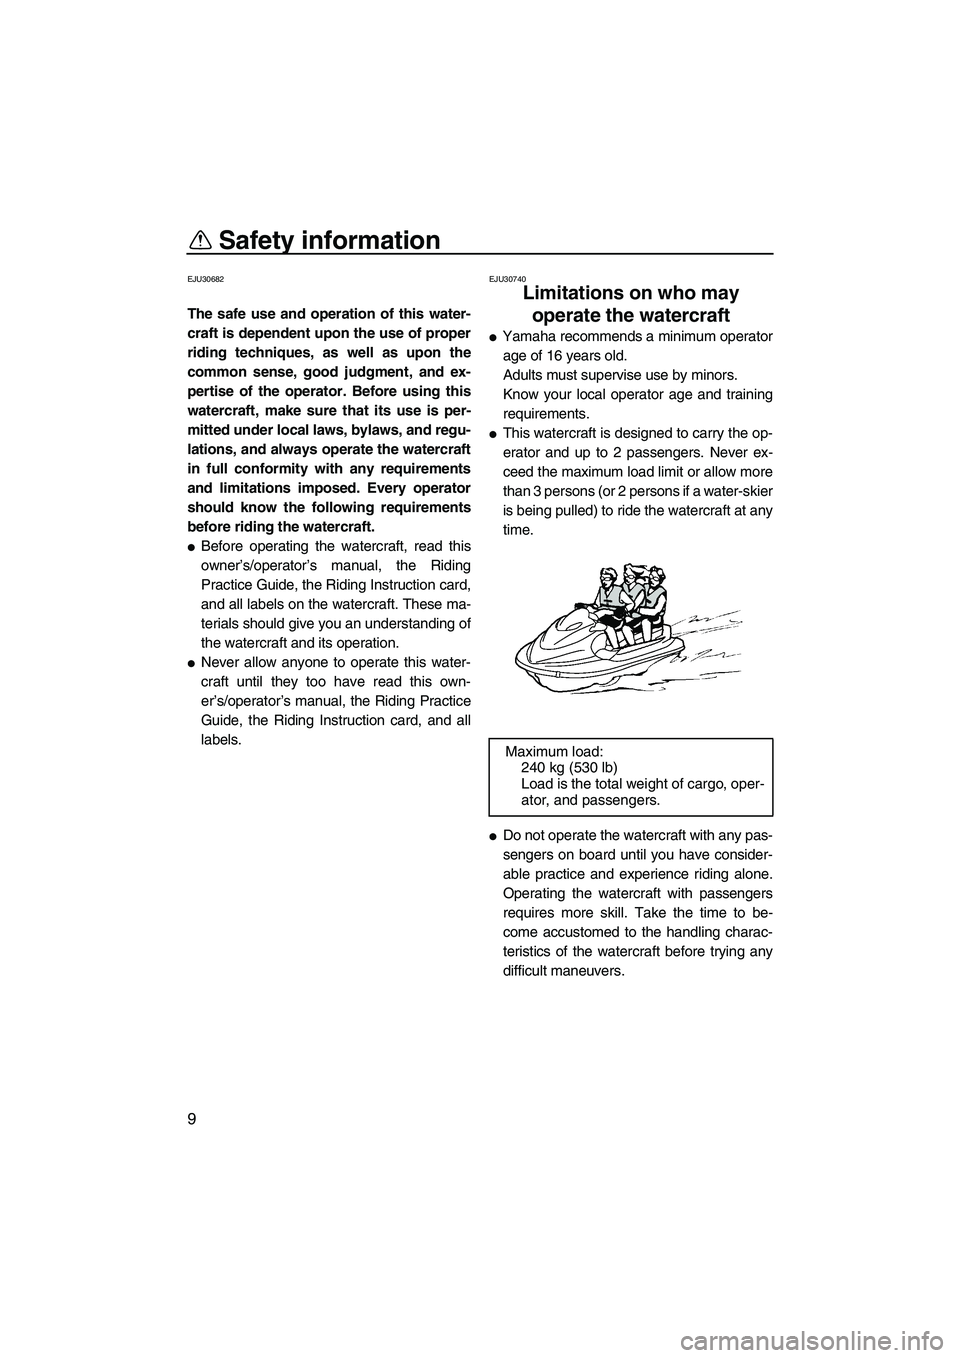 YAMAHA VX SPORT 2010 User Guide Safety information
9
EJU30682
The safe use and operation of this water-
craft is dependent upon the use of proper
riding techniques, as well as upon the
common sense, good judgment, and ex-
pertise of